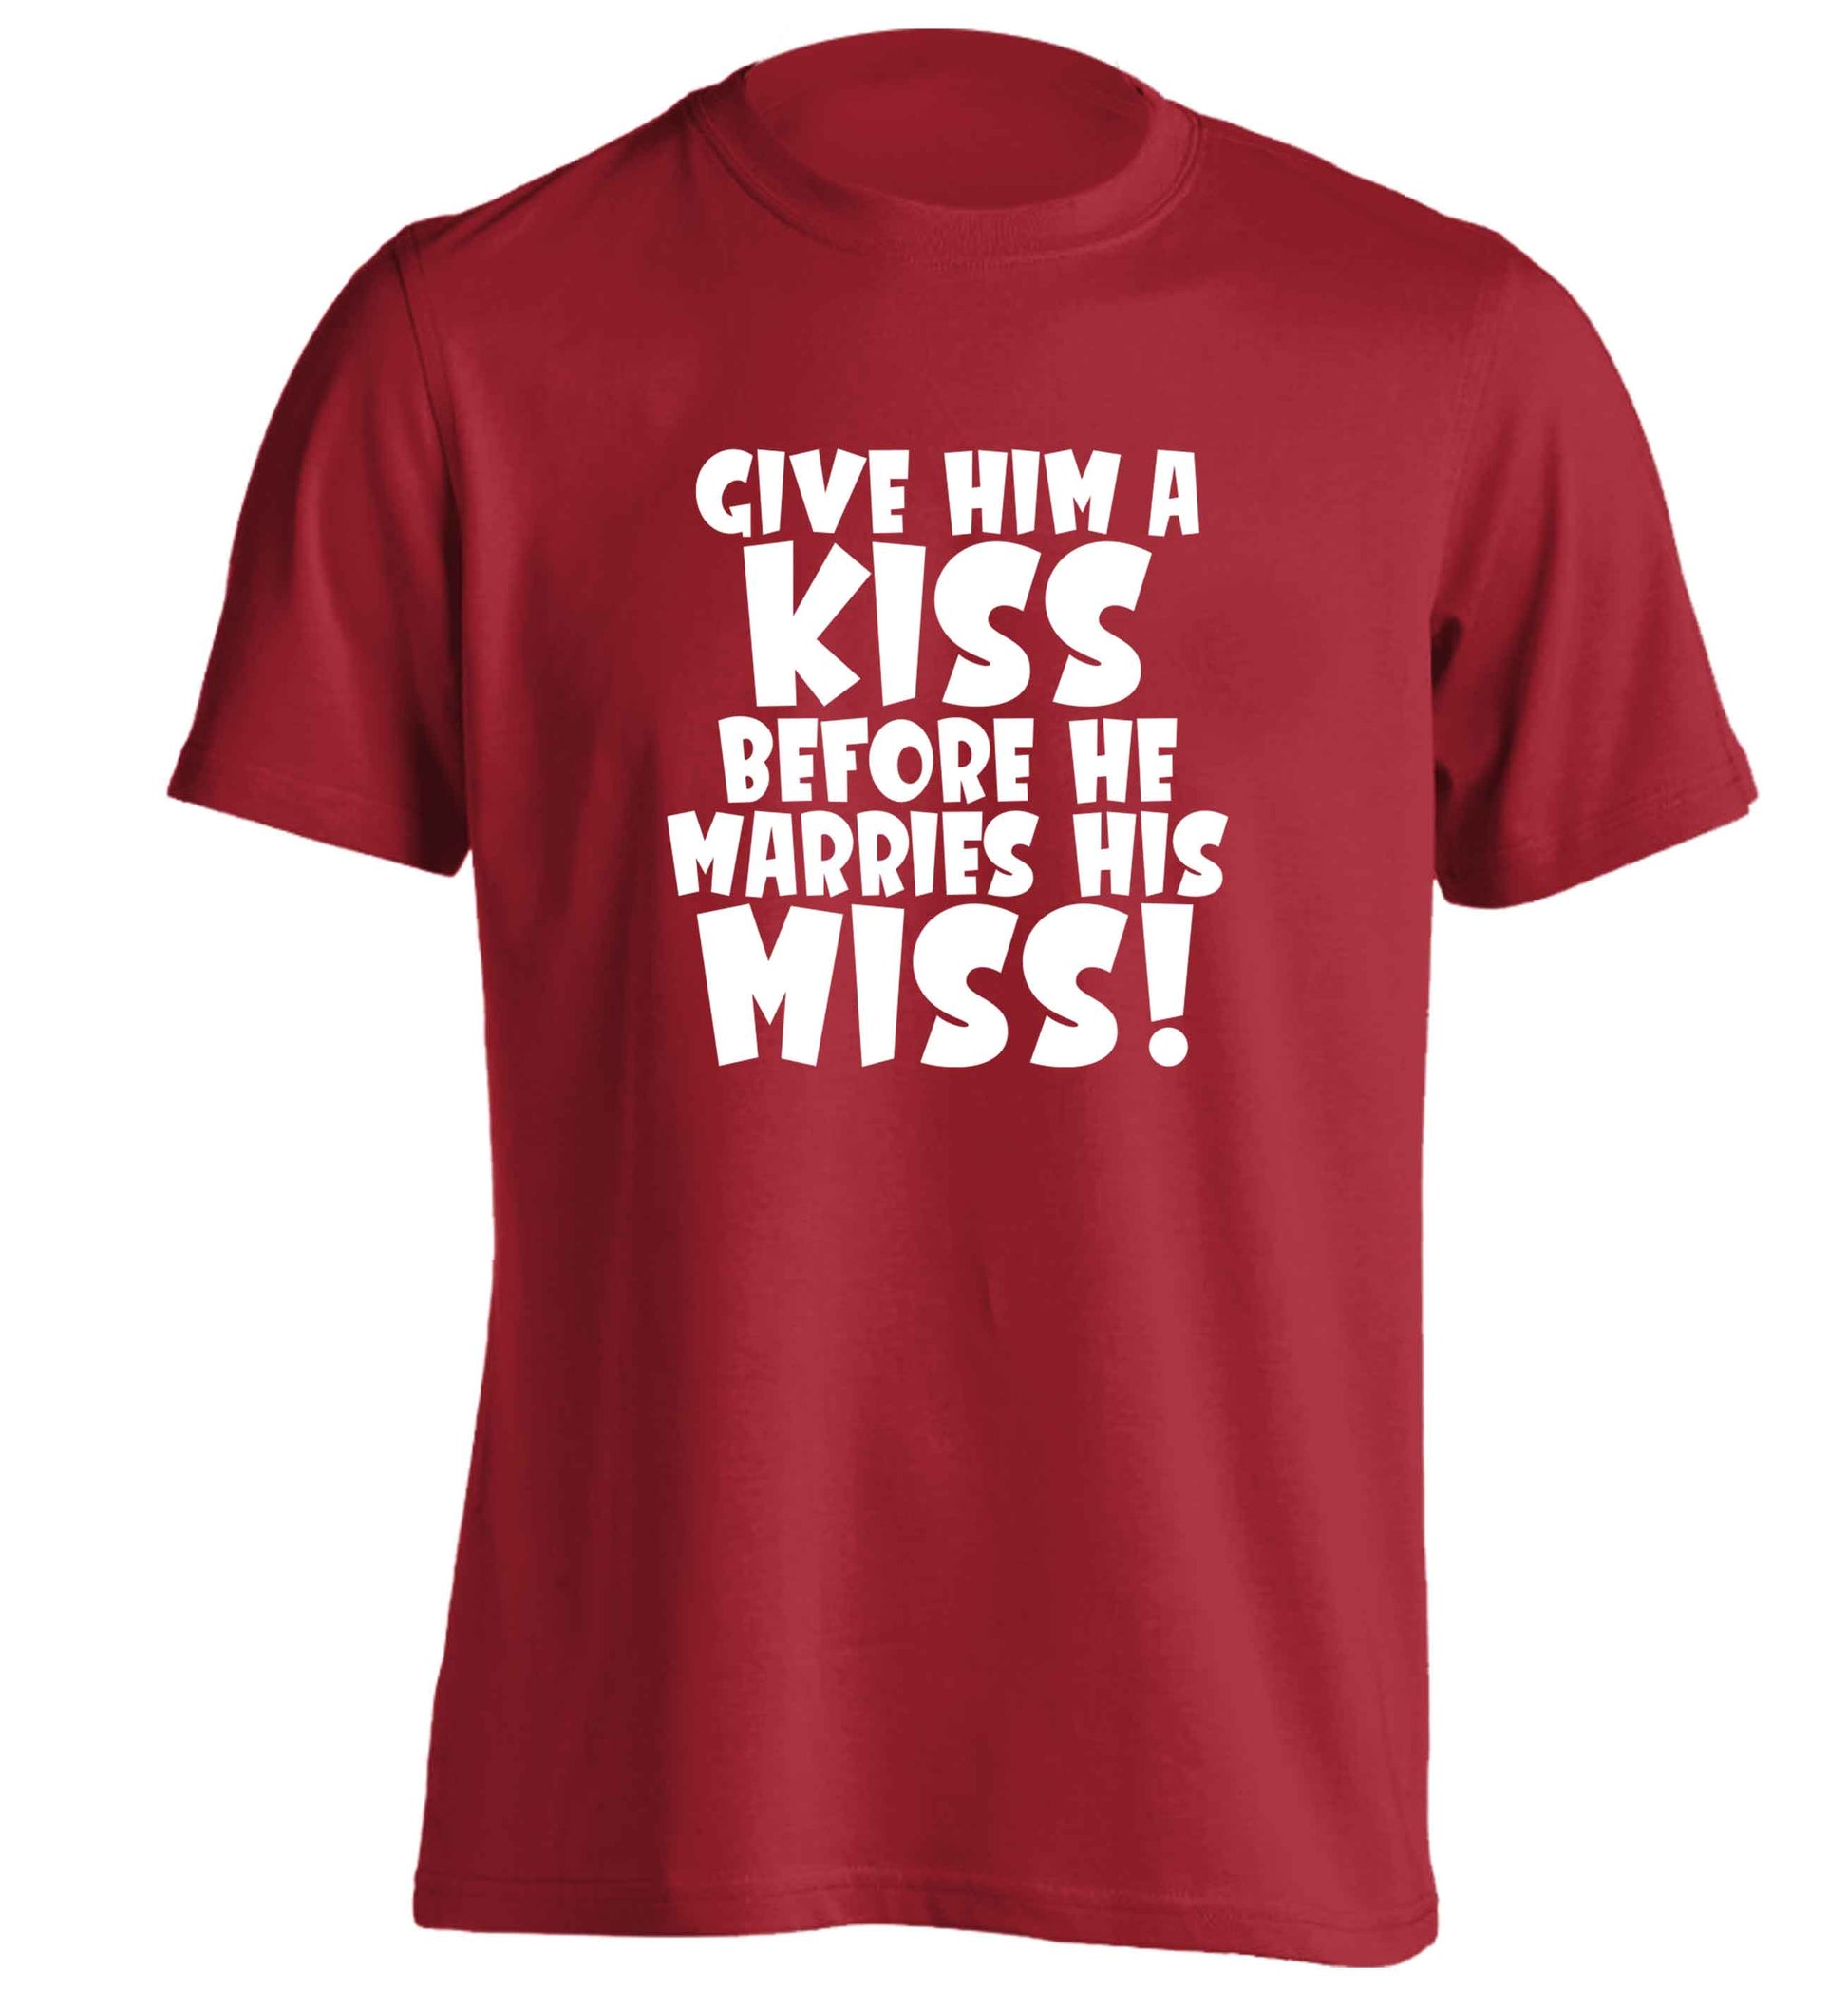 Give him a kiss before he marries his miss adults unisex red Tshirt 2XL